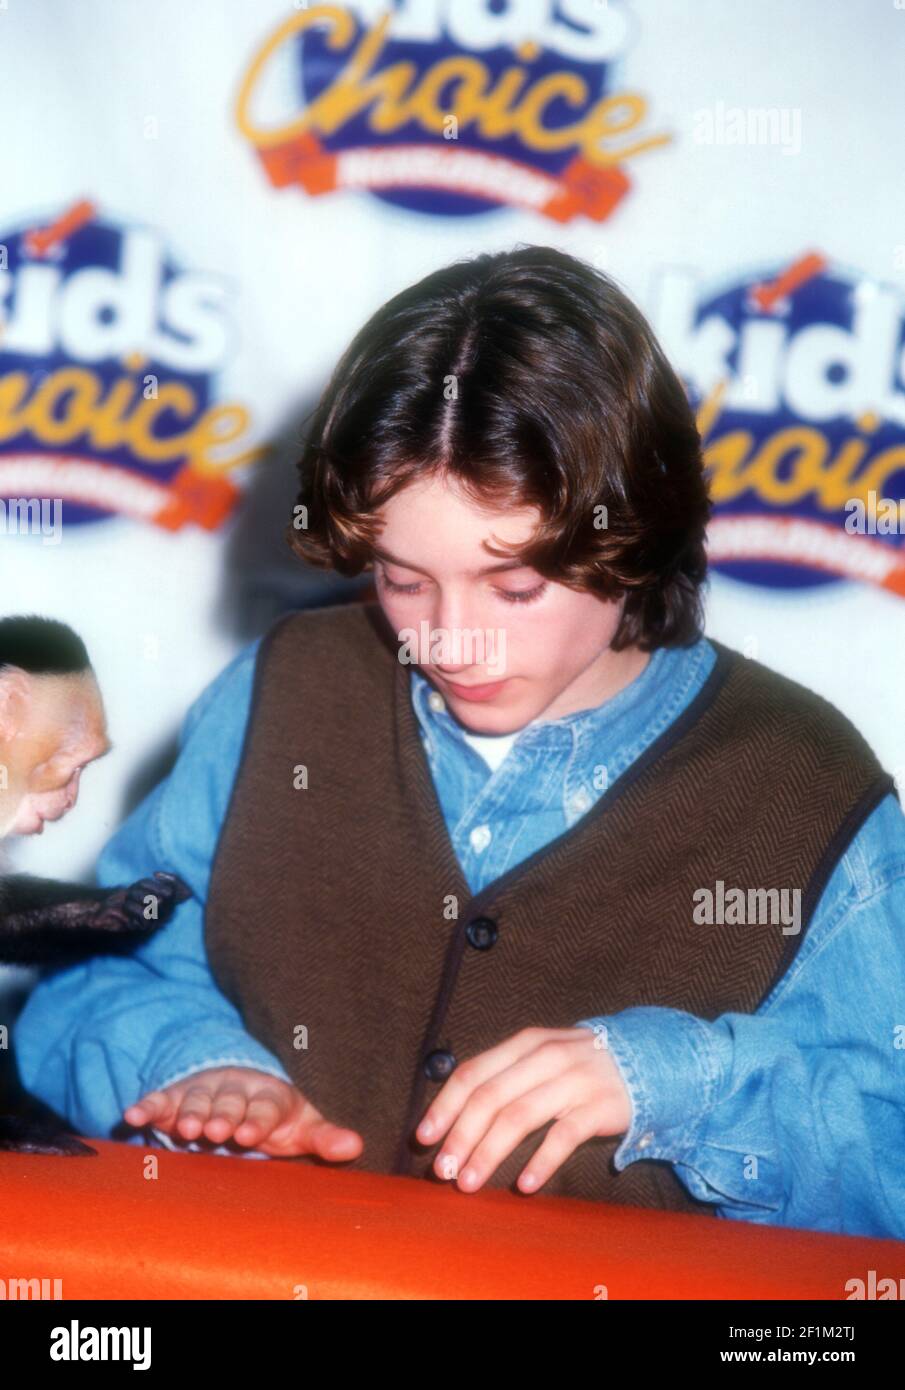 Universal City, California, USA 11th May 1996 Actor Elijah Wood attends the Ninth Annual Nickelodeon's Kids' Choice Awards on May 11, 1996 at Universal Studios in Universal City, California, USA. Photo by Barry King/Alamy Stock Photo Stock Photo